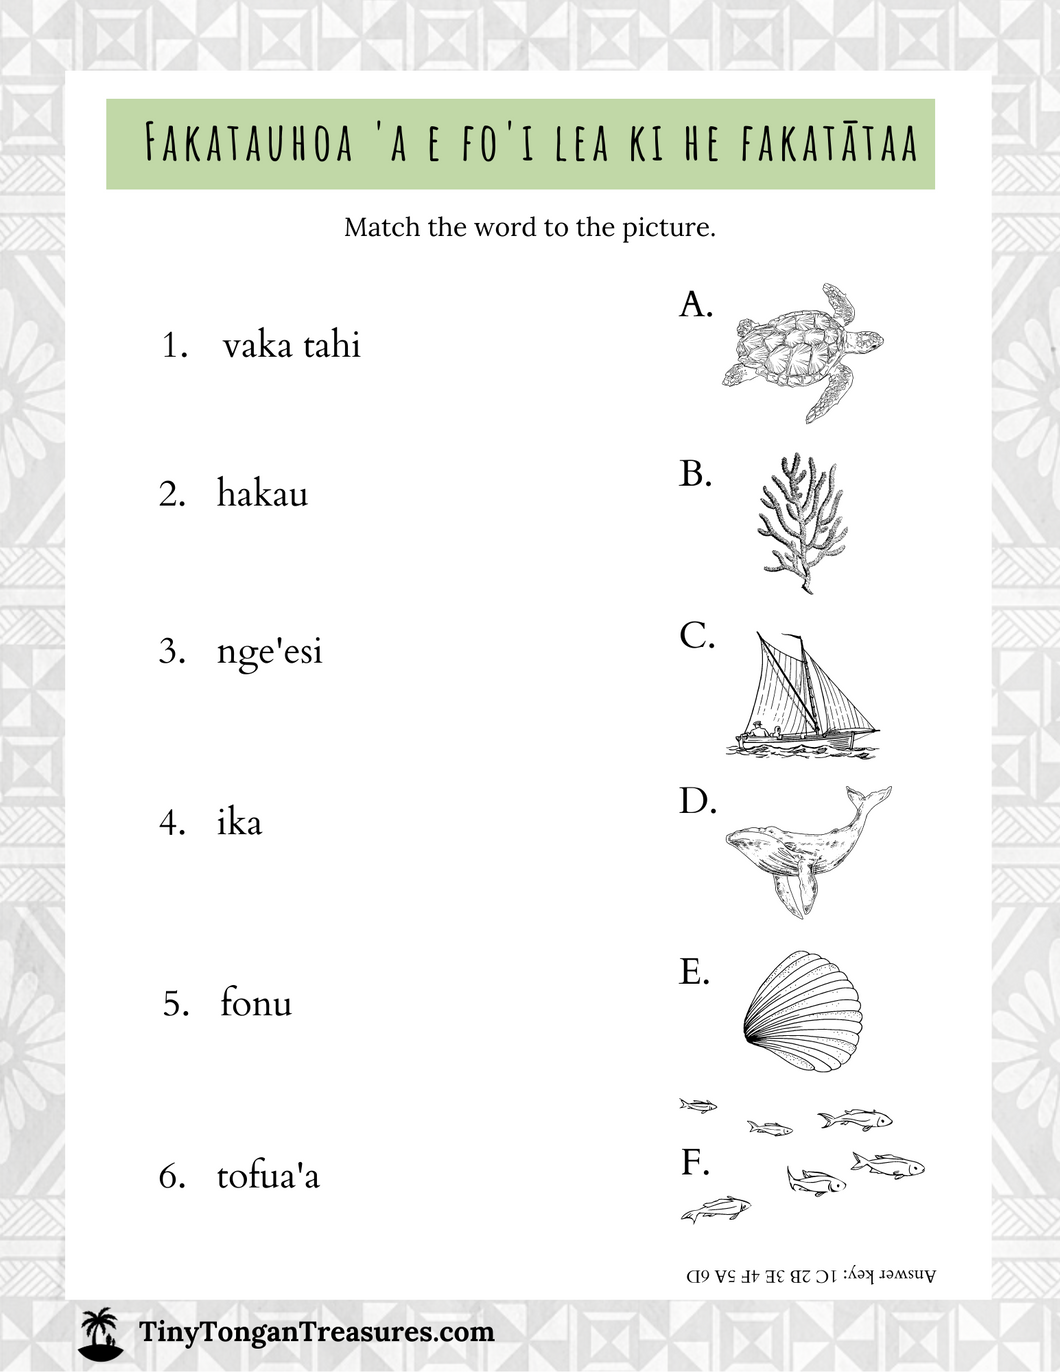 Picture & Word Match - Tongan Sea